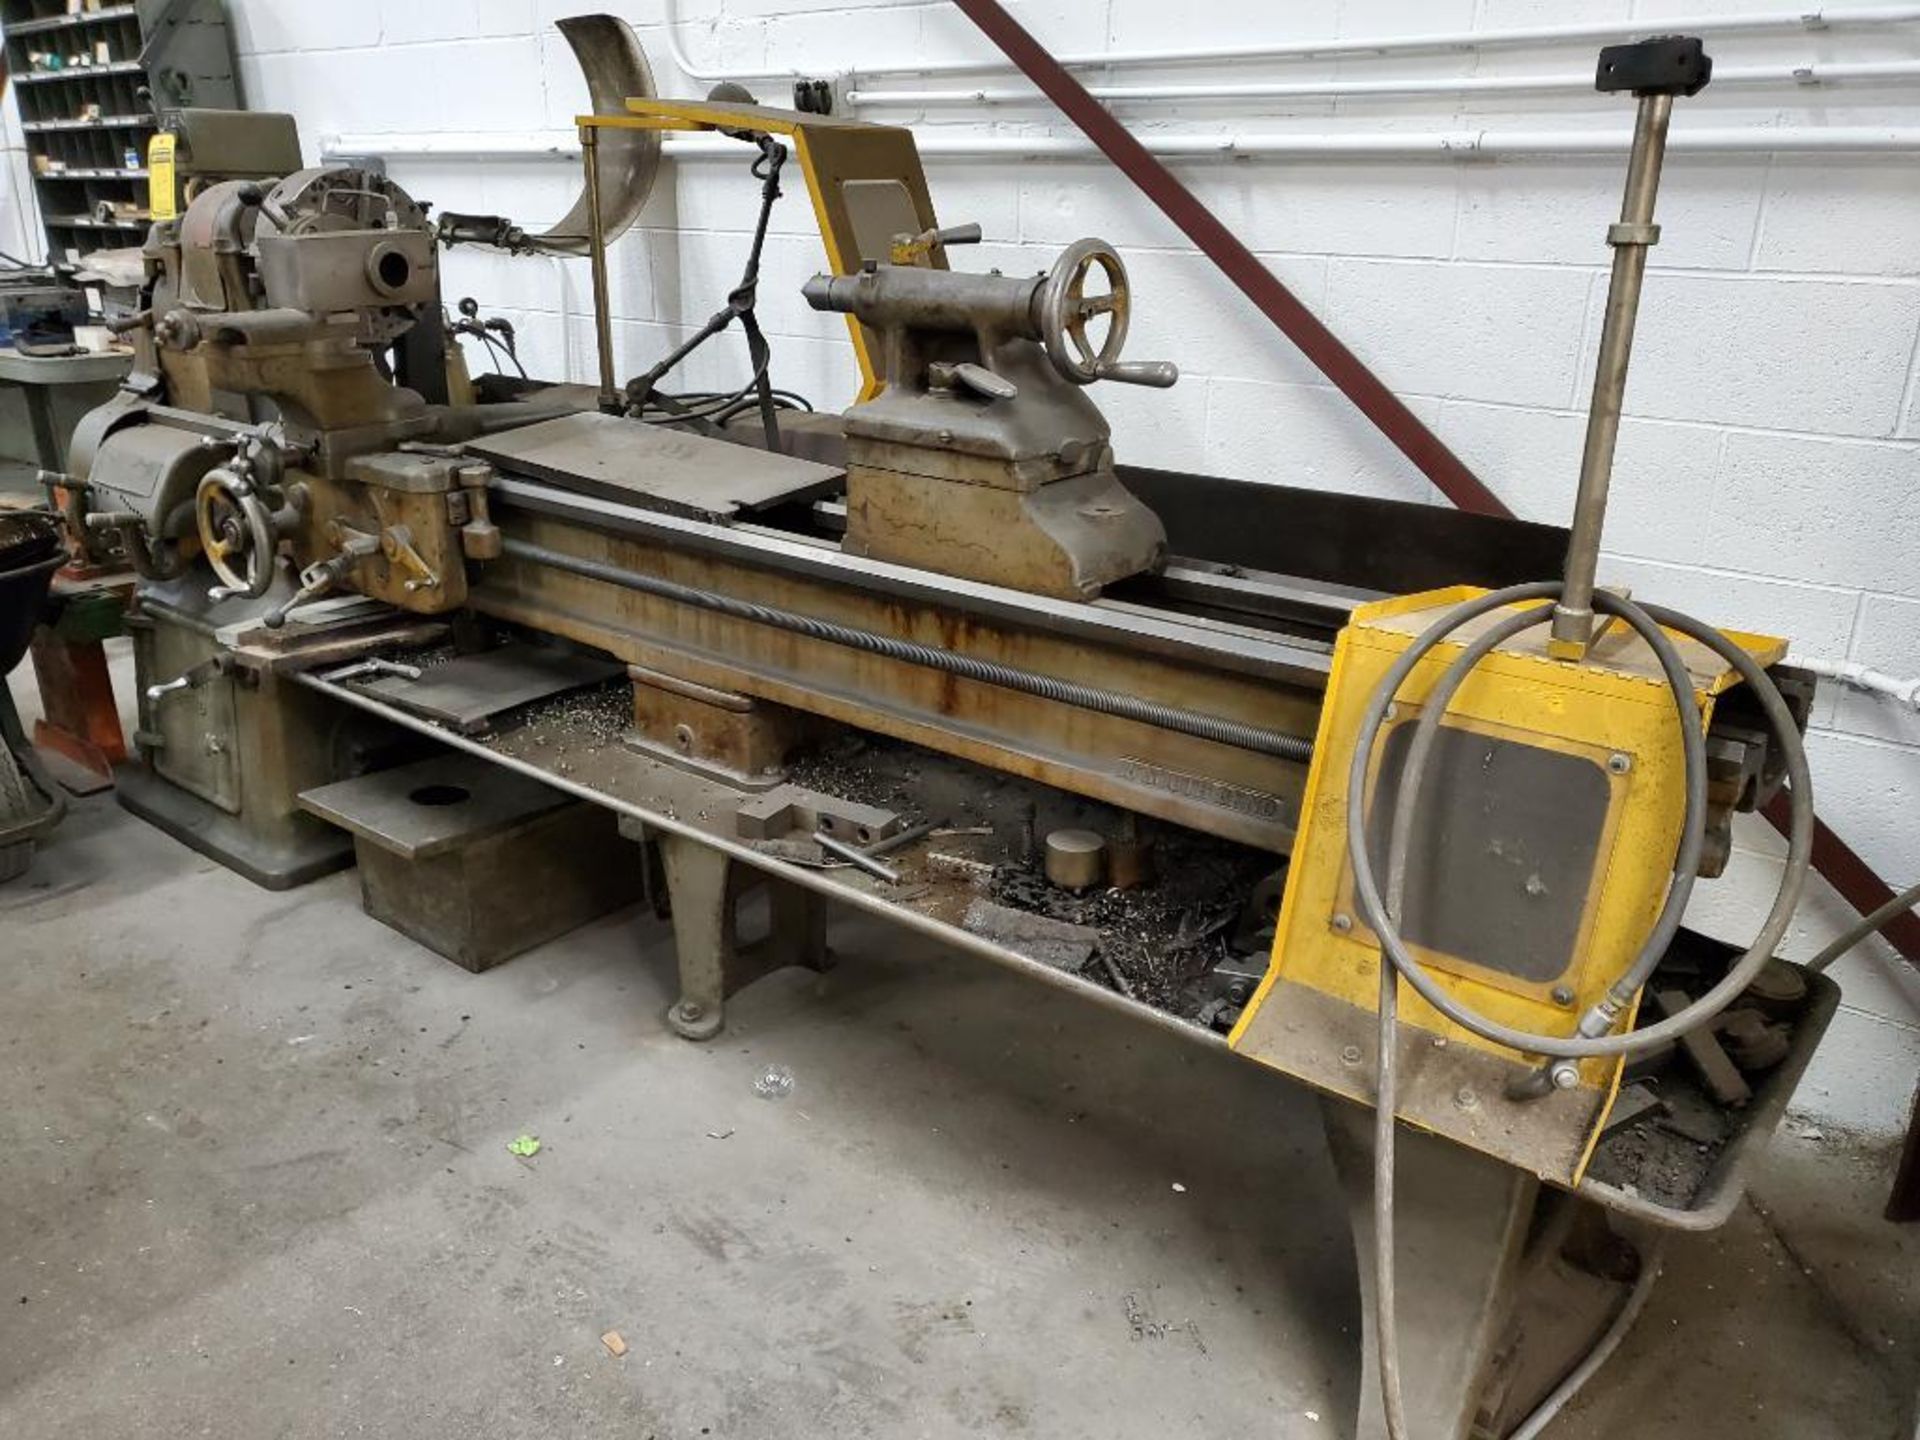 South Bend Horizontal Engine Lathe, 8' Gap Bed, 12" 3-Jaw Chuck, Tailstock, Cross Slide, Toolpost w/ - Image 2 of 11